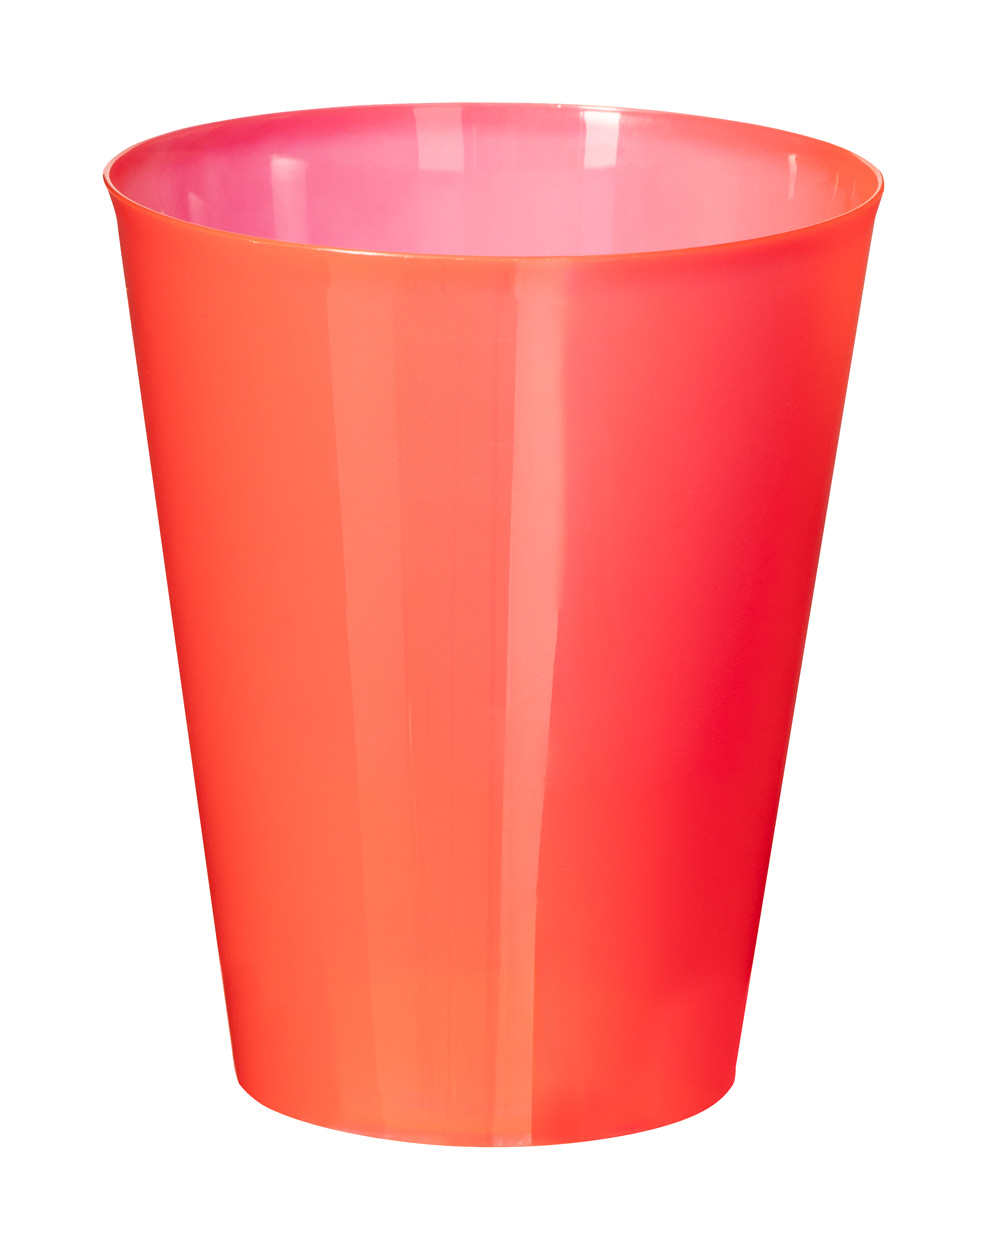 Colorbert reusable cup for events - red